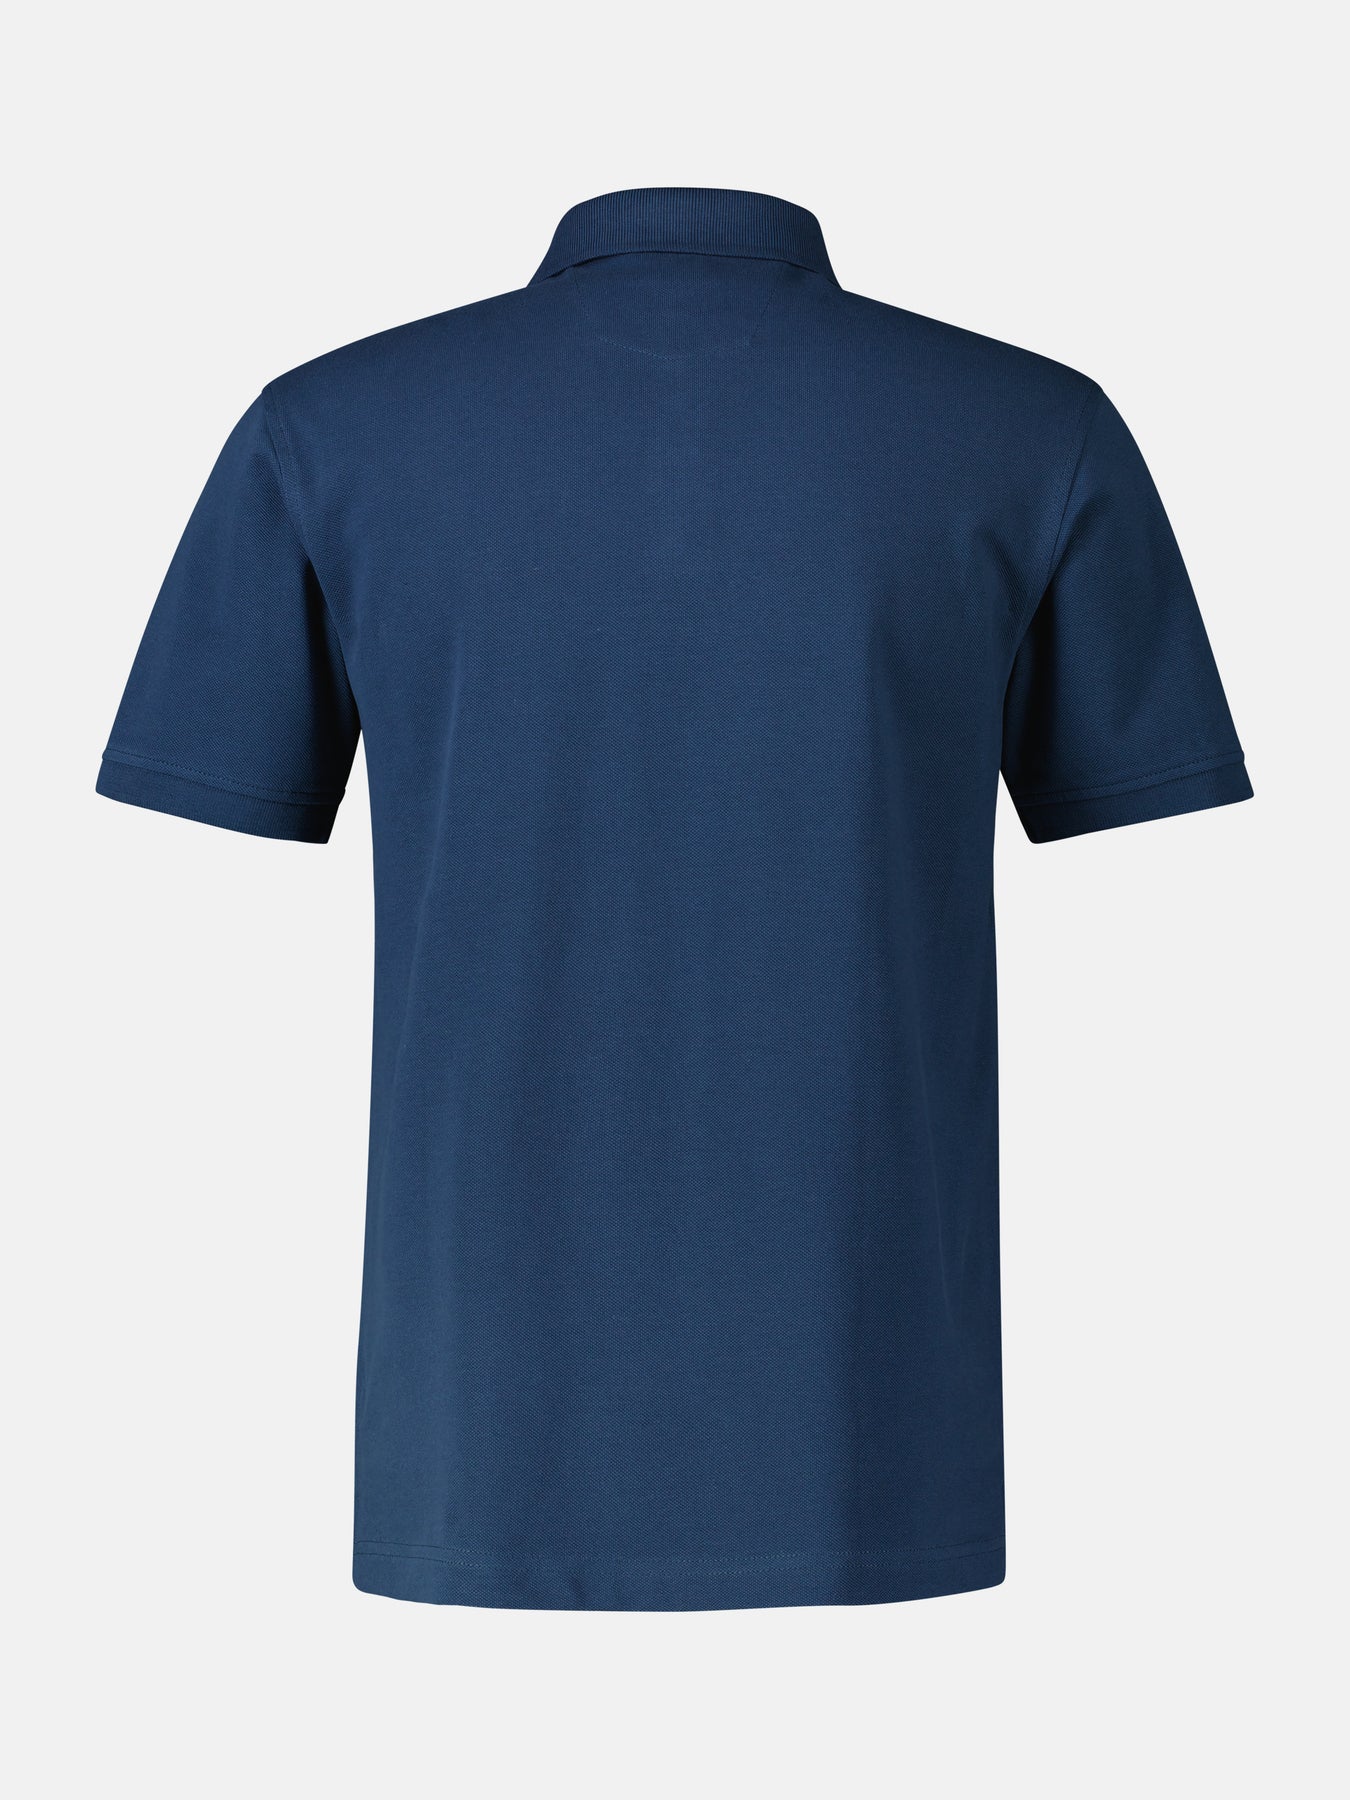 Polo shirt in LERROS many colors SHOP –